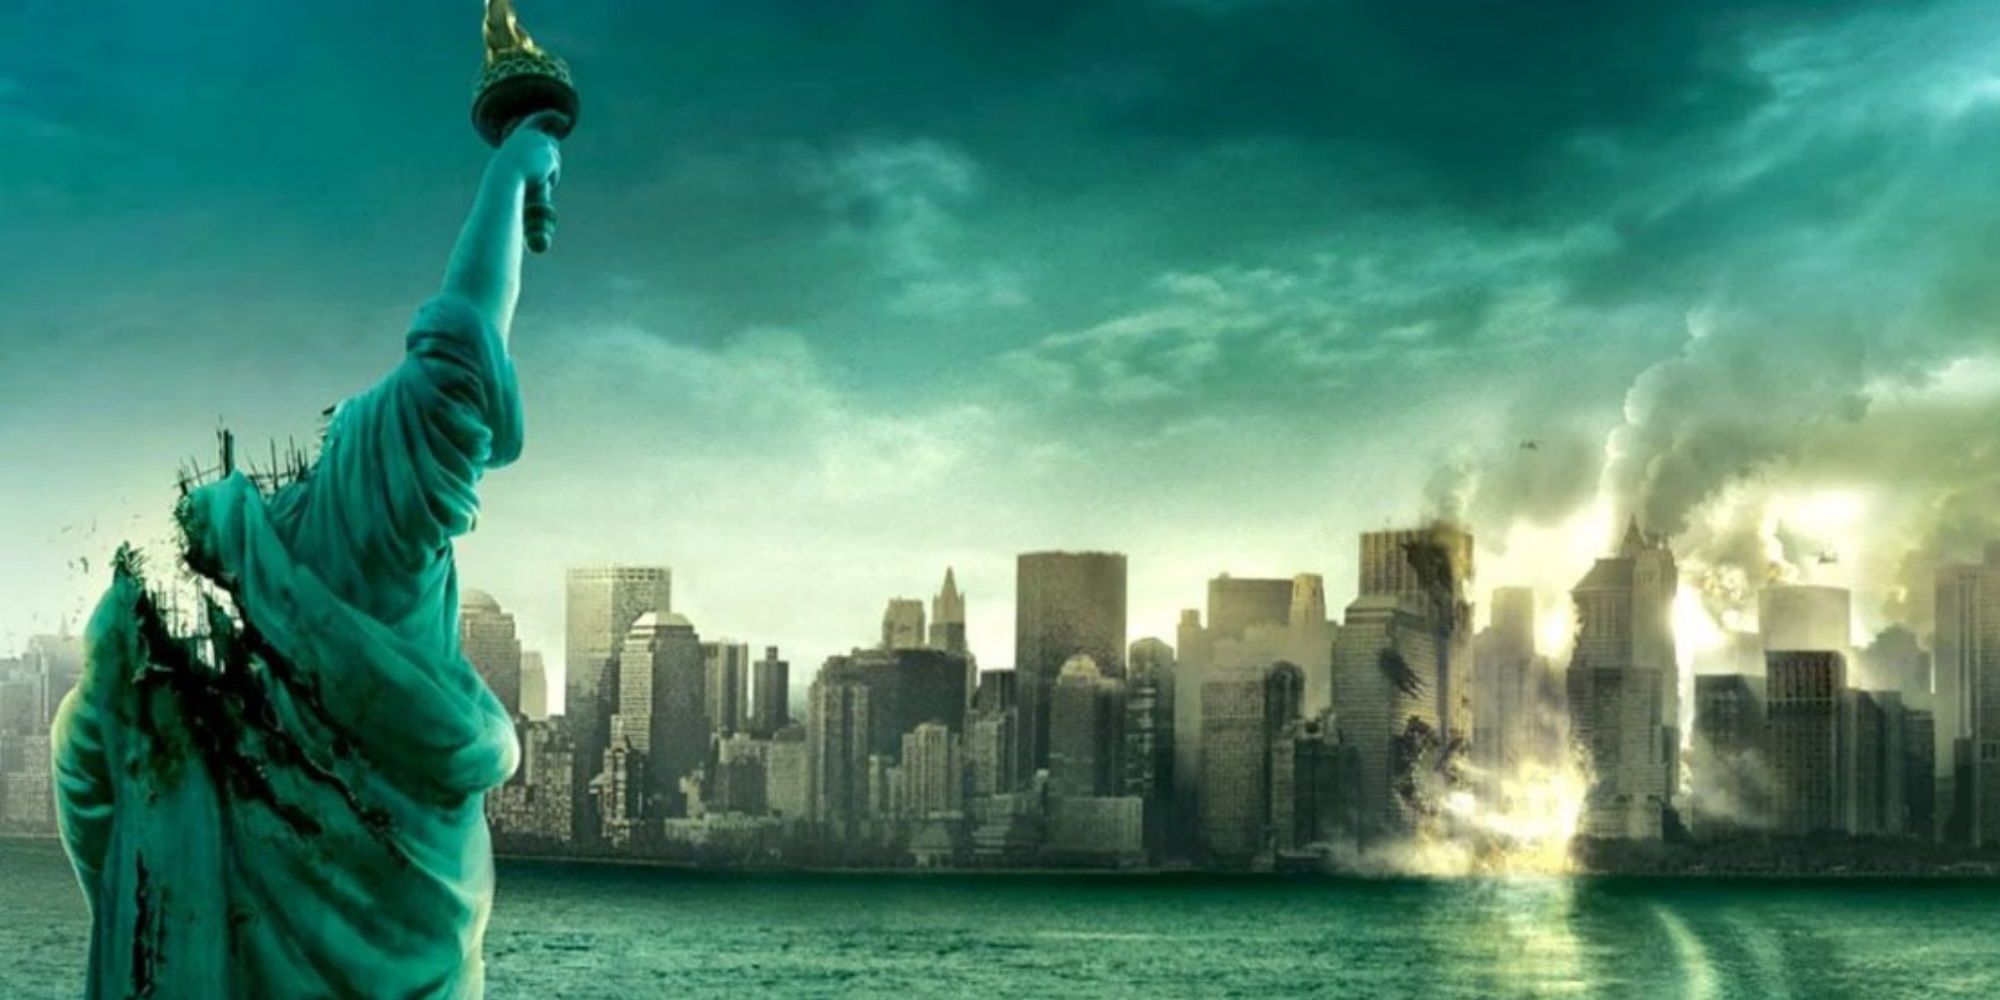 Cloverfield - The famous image of the Statue of Liberty having been decapitated.